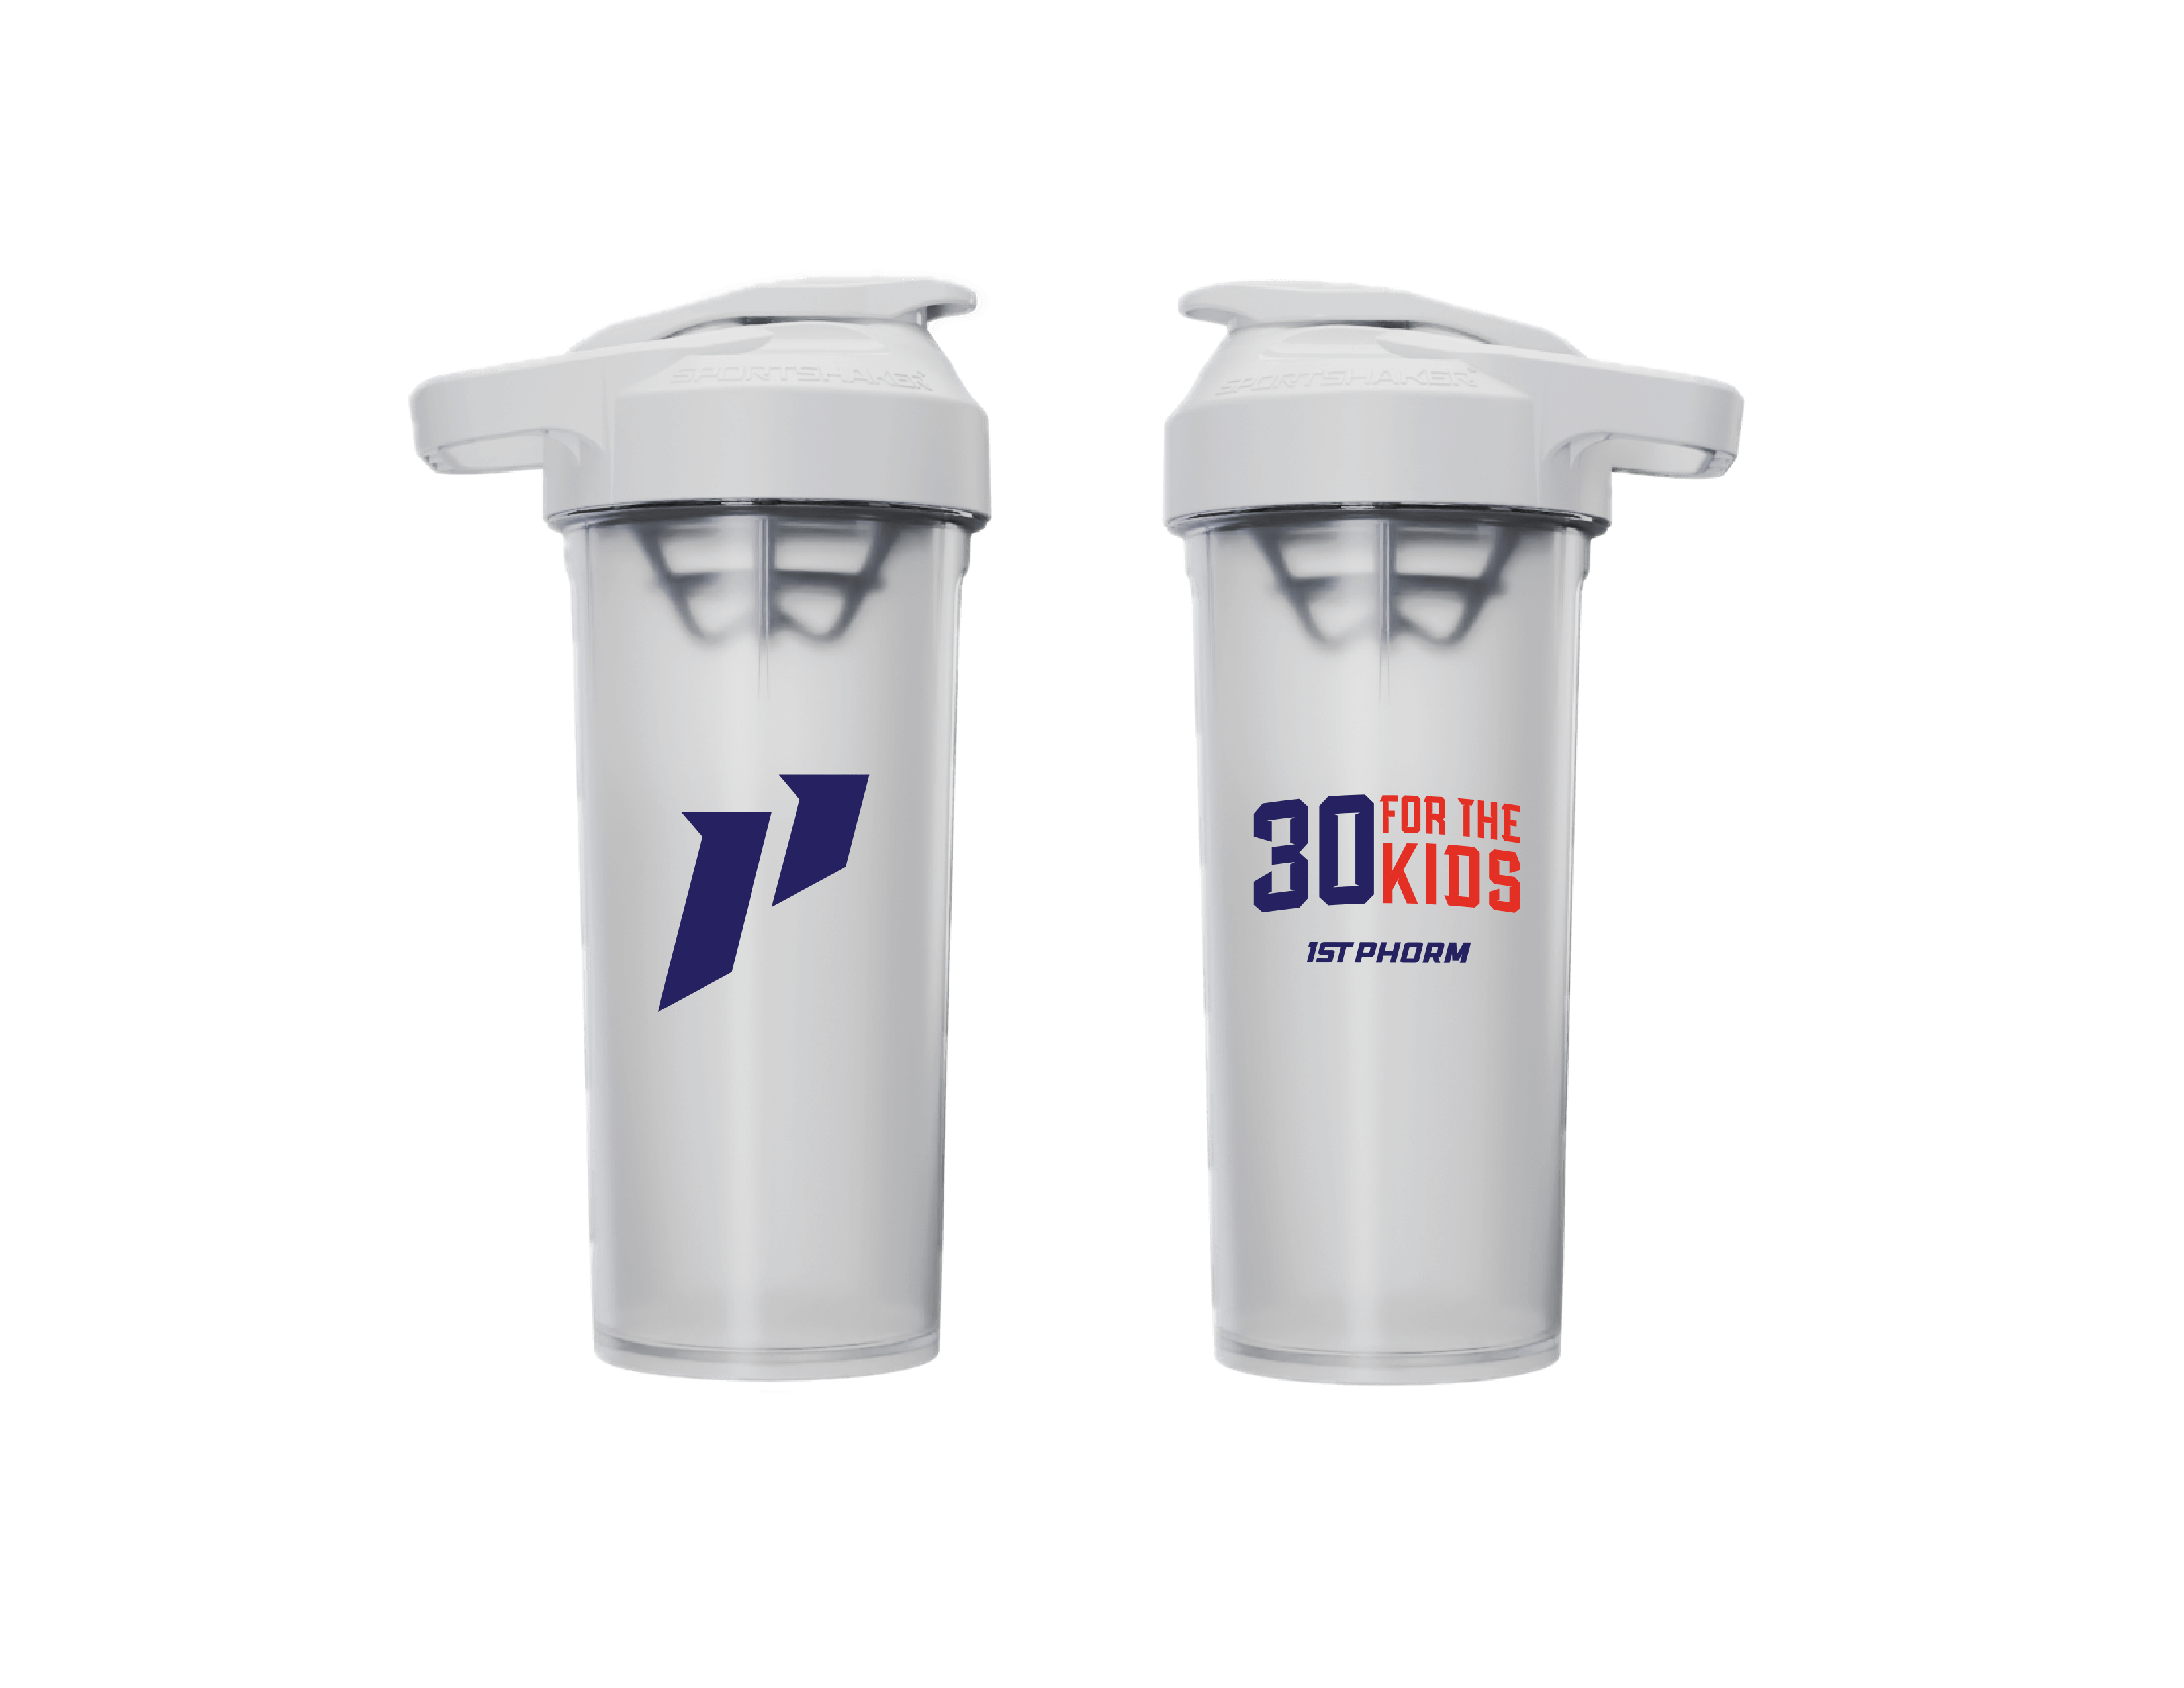 Two white protein shaker bottles with logos on a black background.